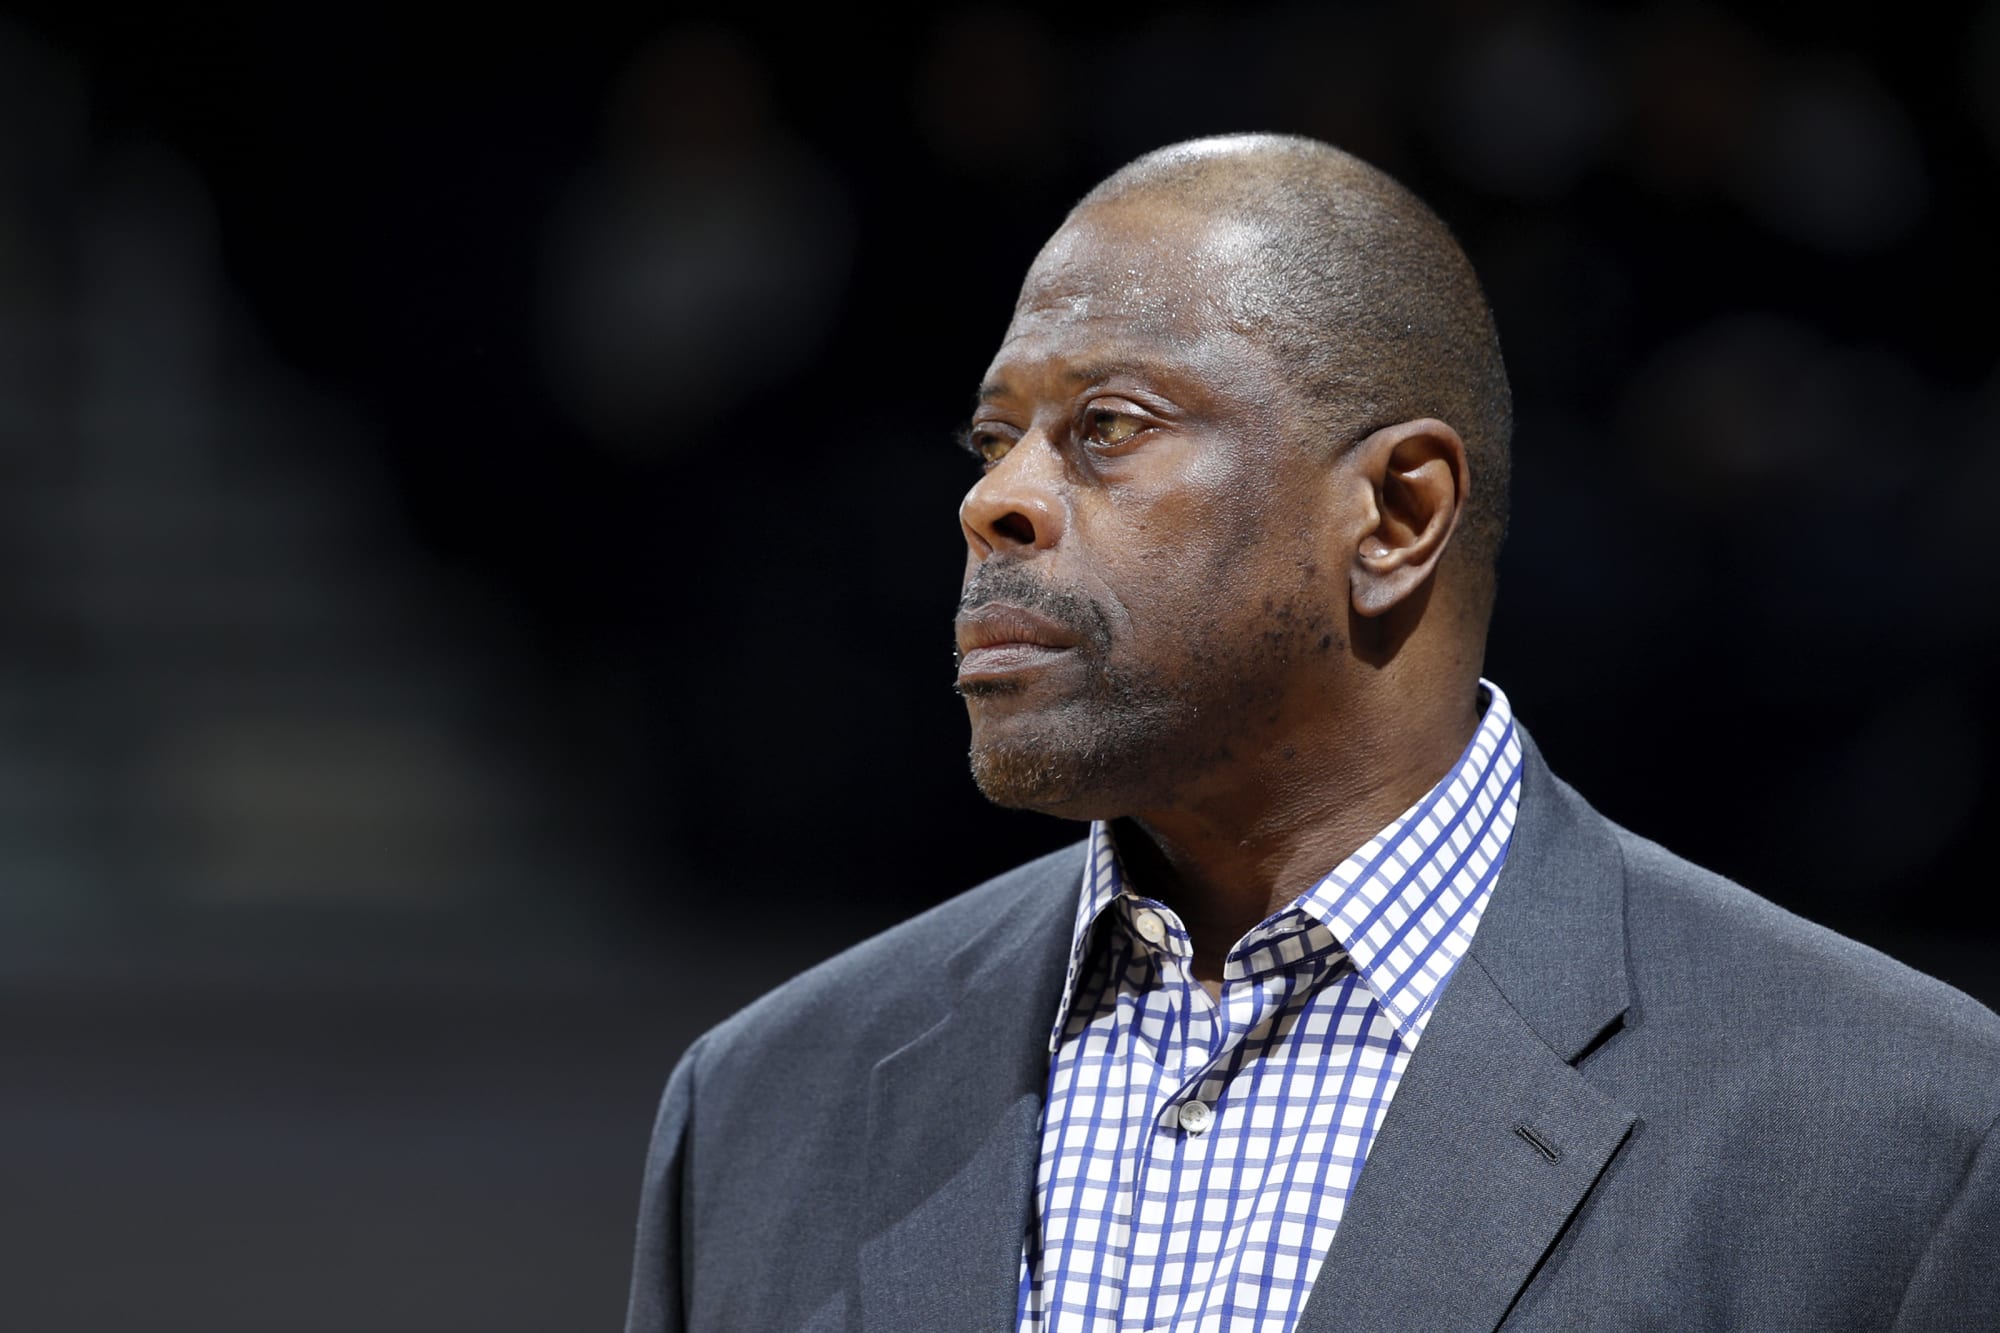 NY Knicks: Patrick Ewing takes high road in response to Oakley criticism